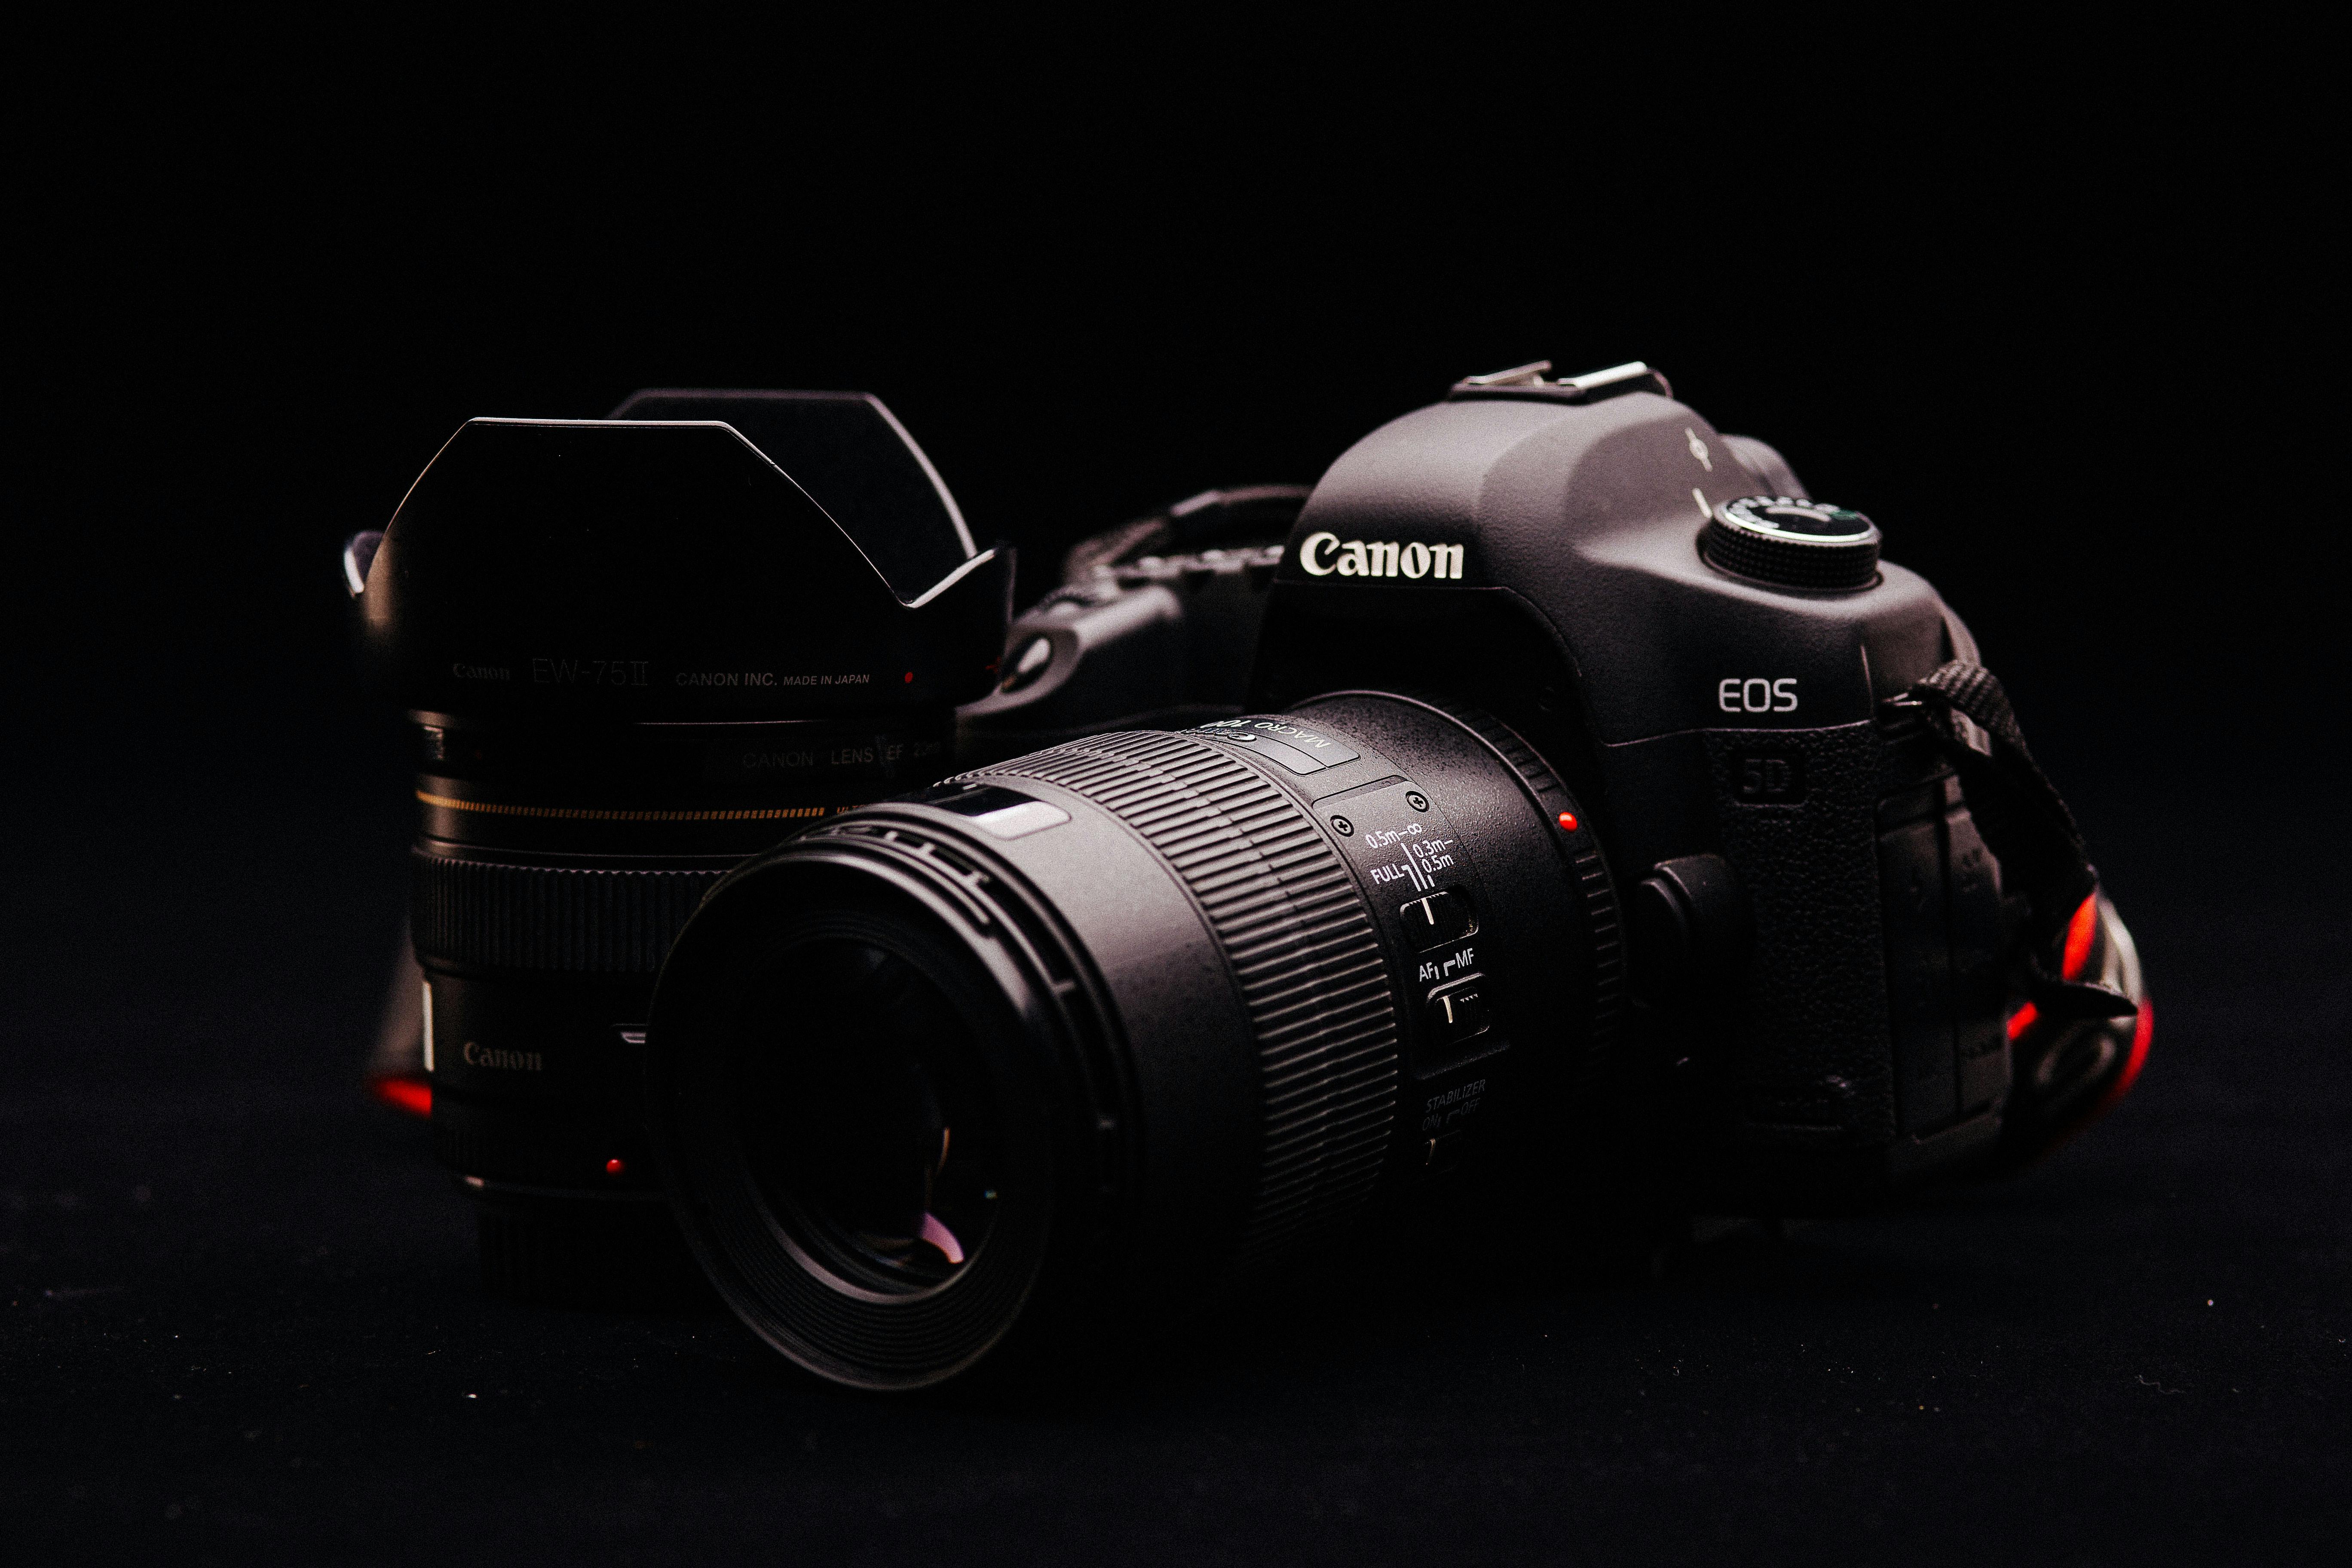 3840x2361 / camera, canon, dslr, hobby, lens, photographer, photography,  profession, taking photo 4k wallpaper - Coolwallpapers.me!